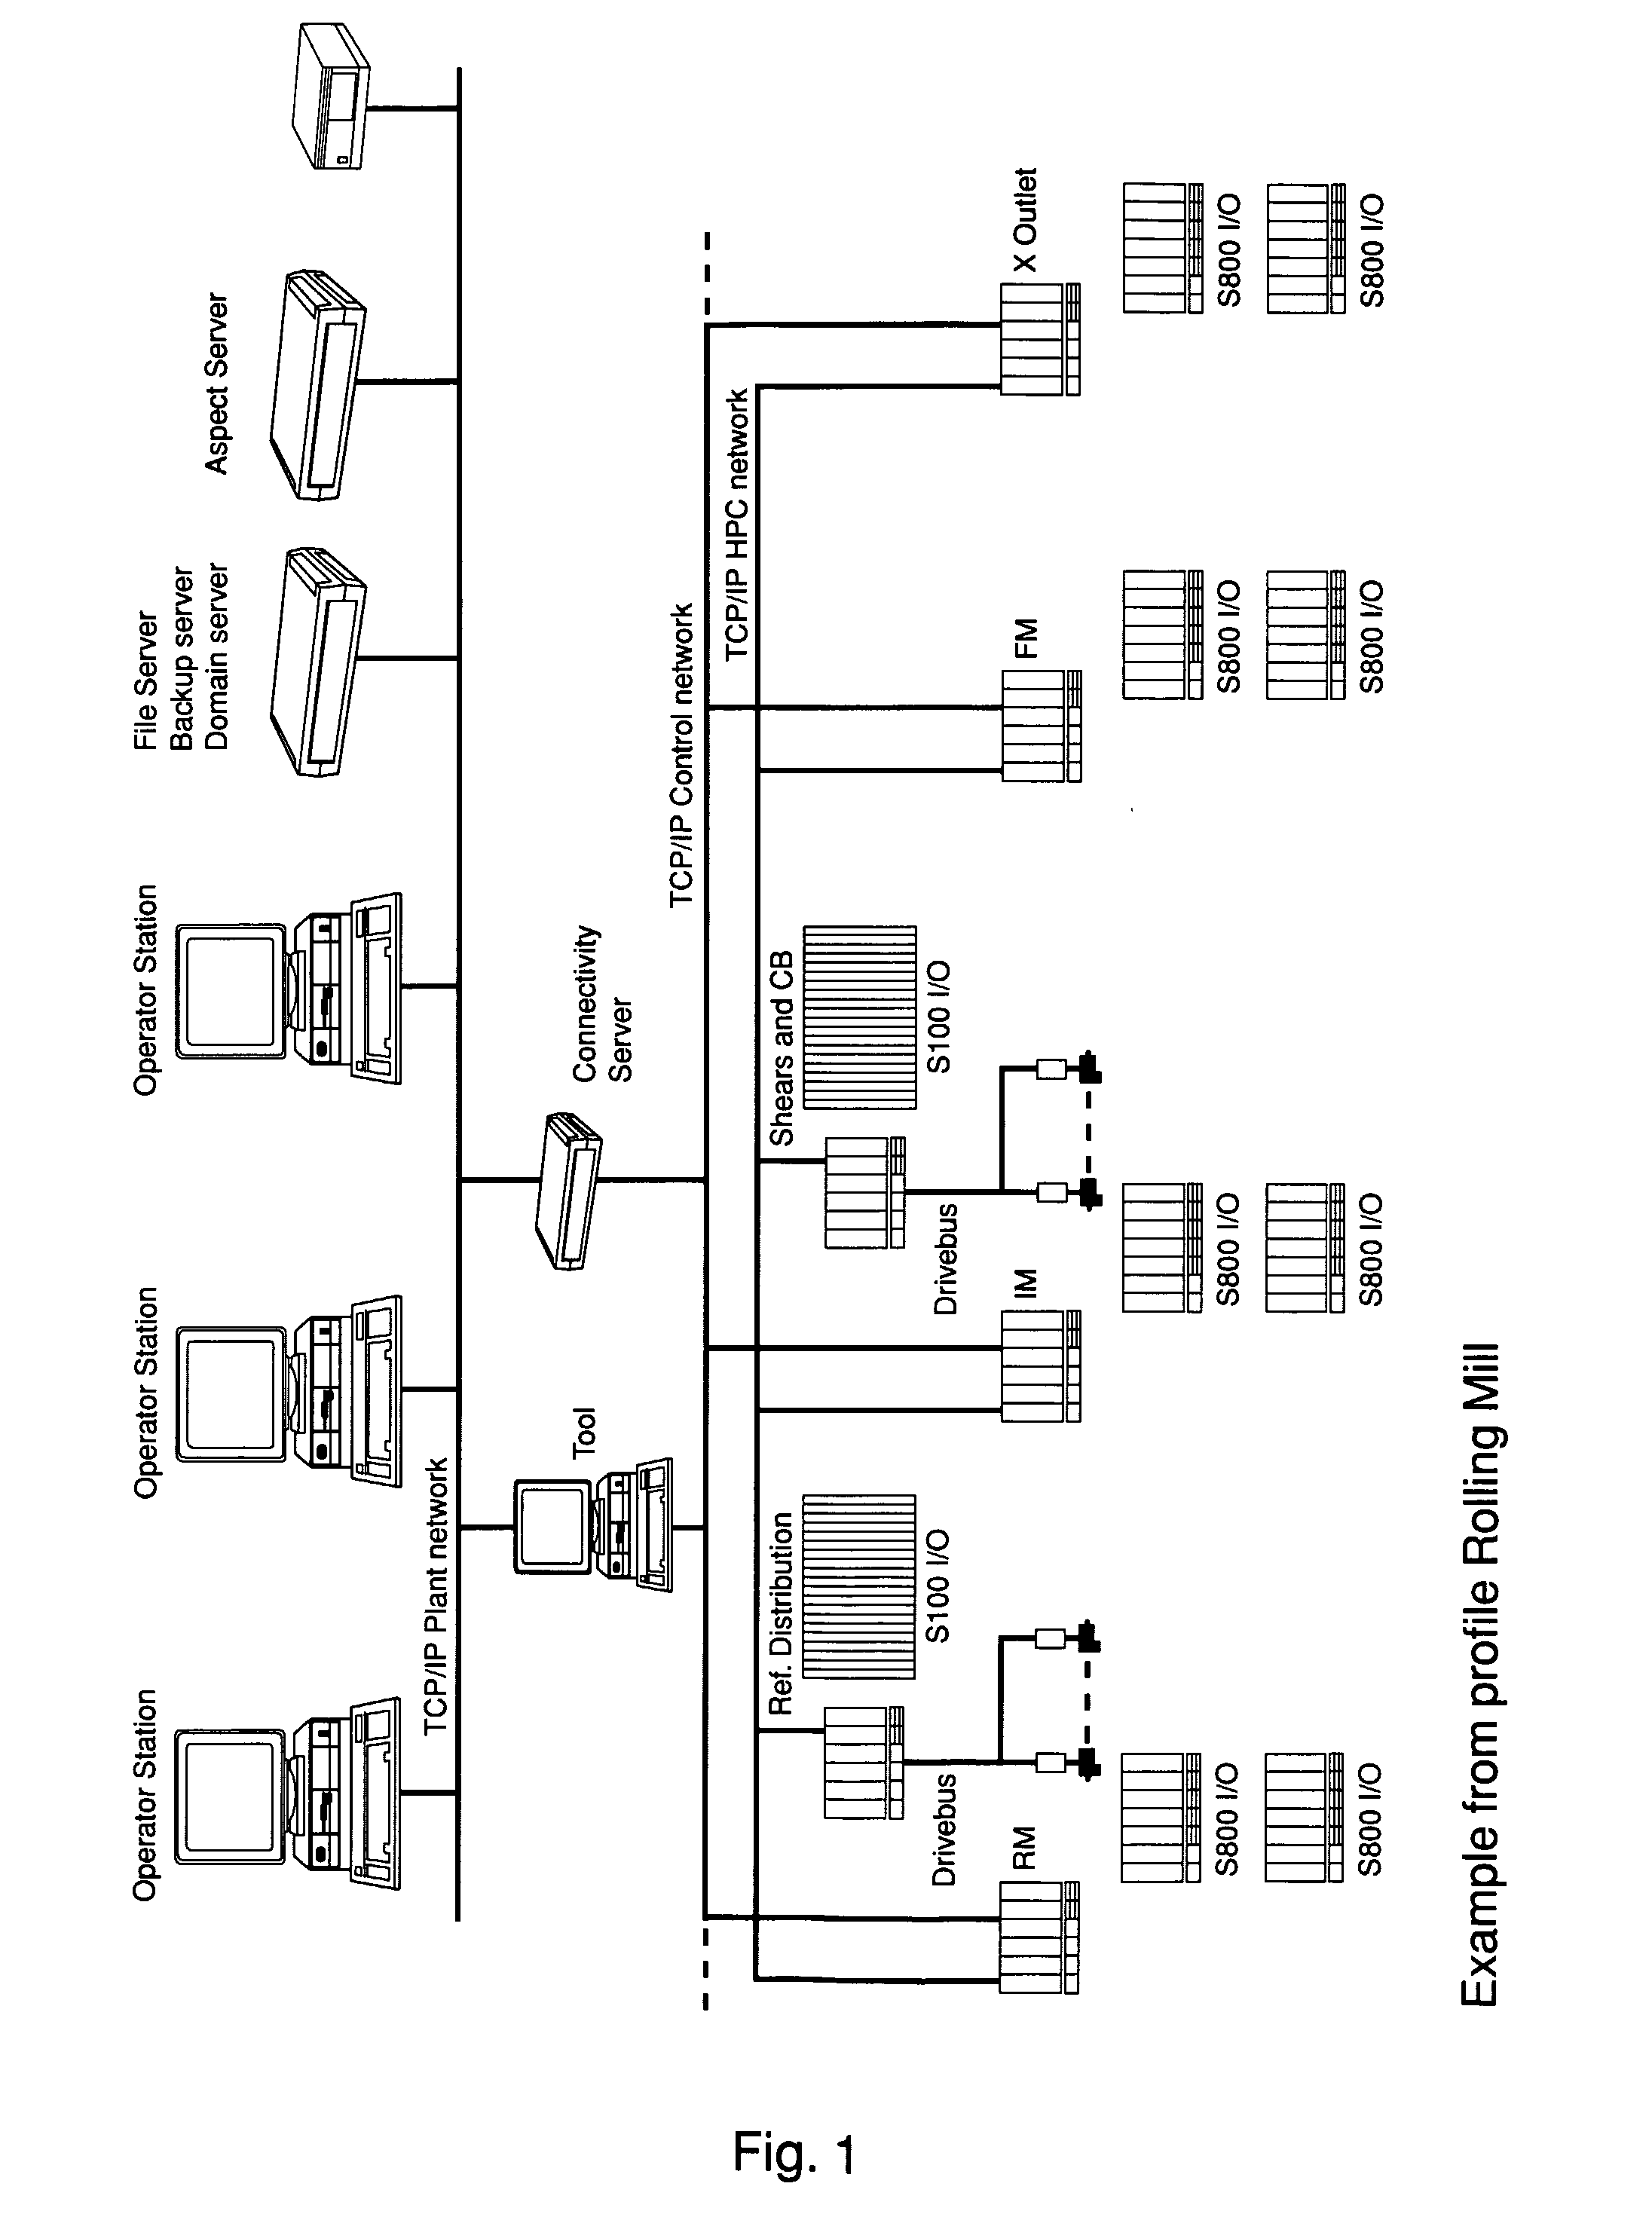 Method In A Safety System For Controlling A Process Or Equipment